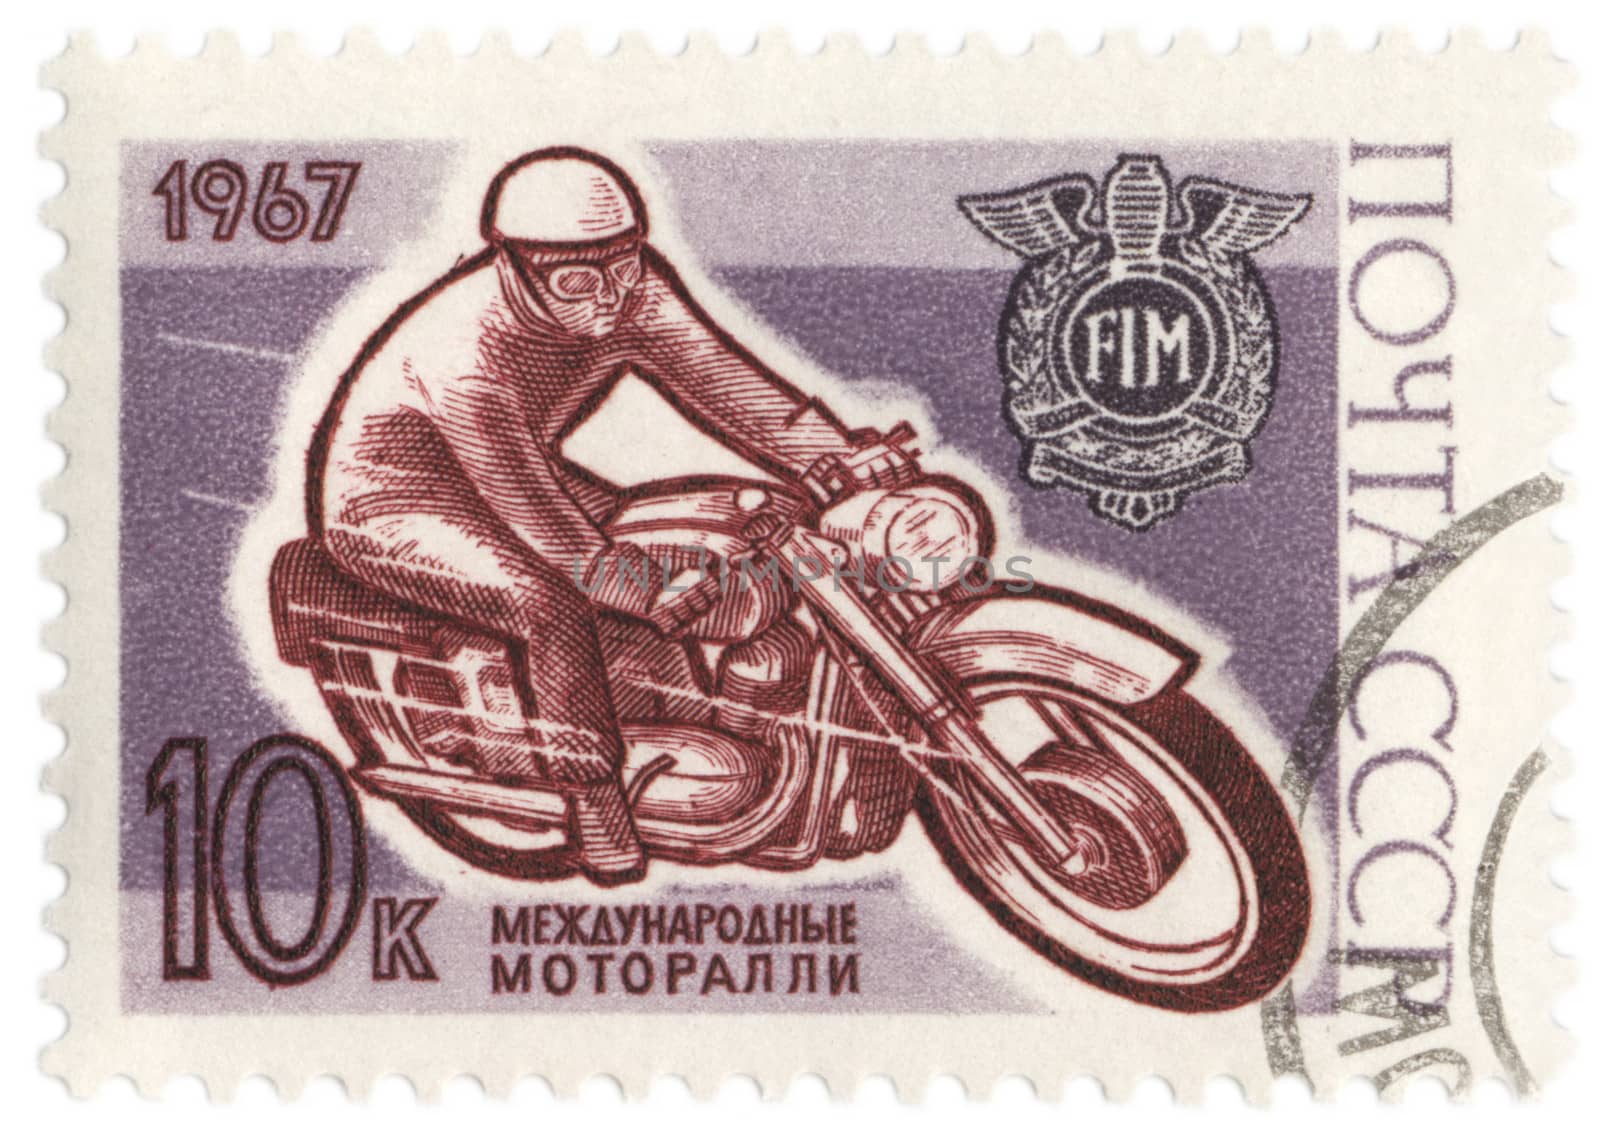 USSR - CIRCA 1967: A stamp printed in USSR shows racing motorcyclist, circa 1967